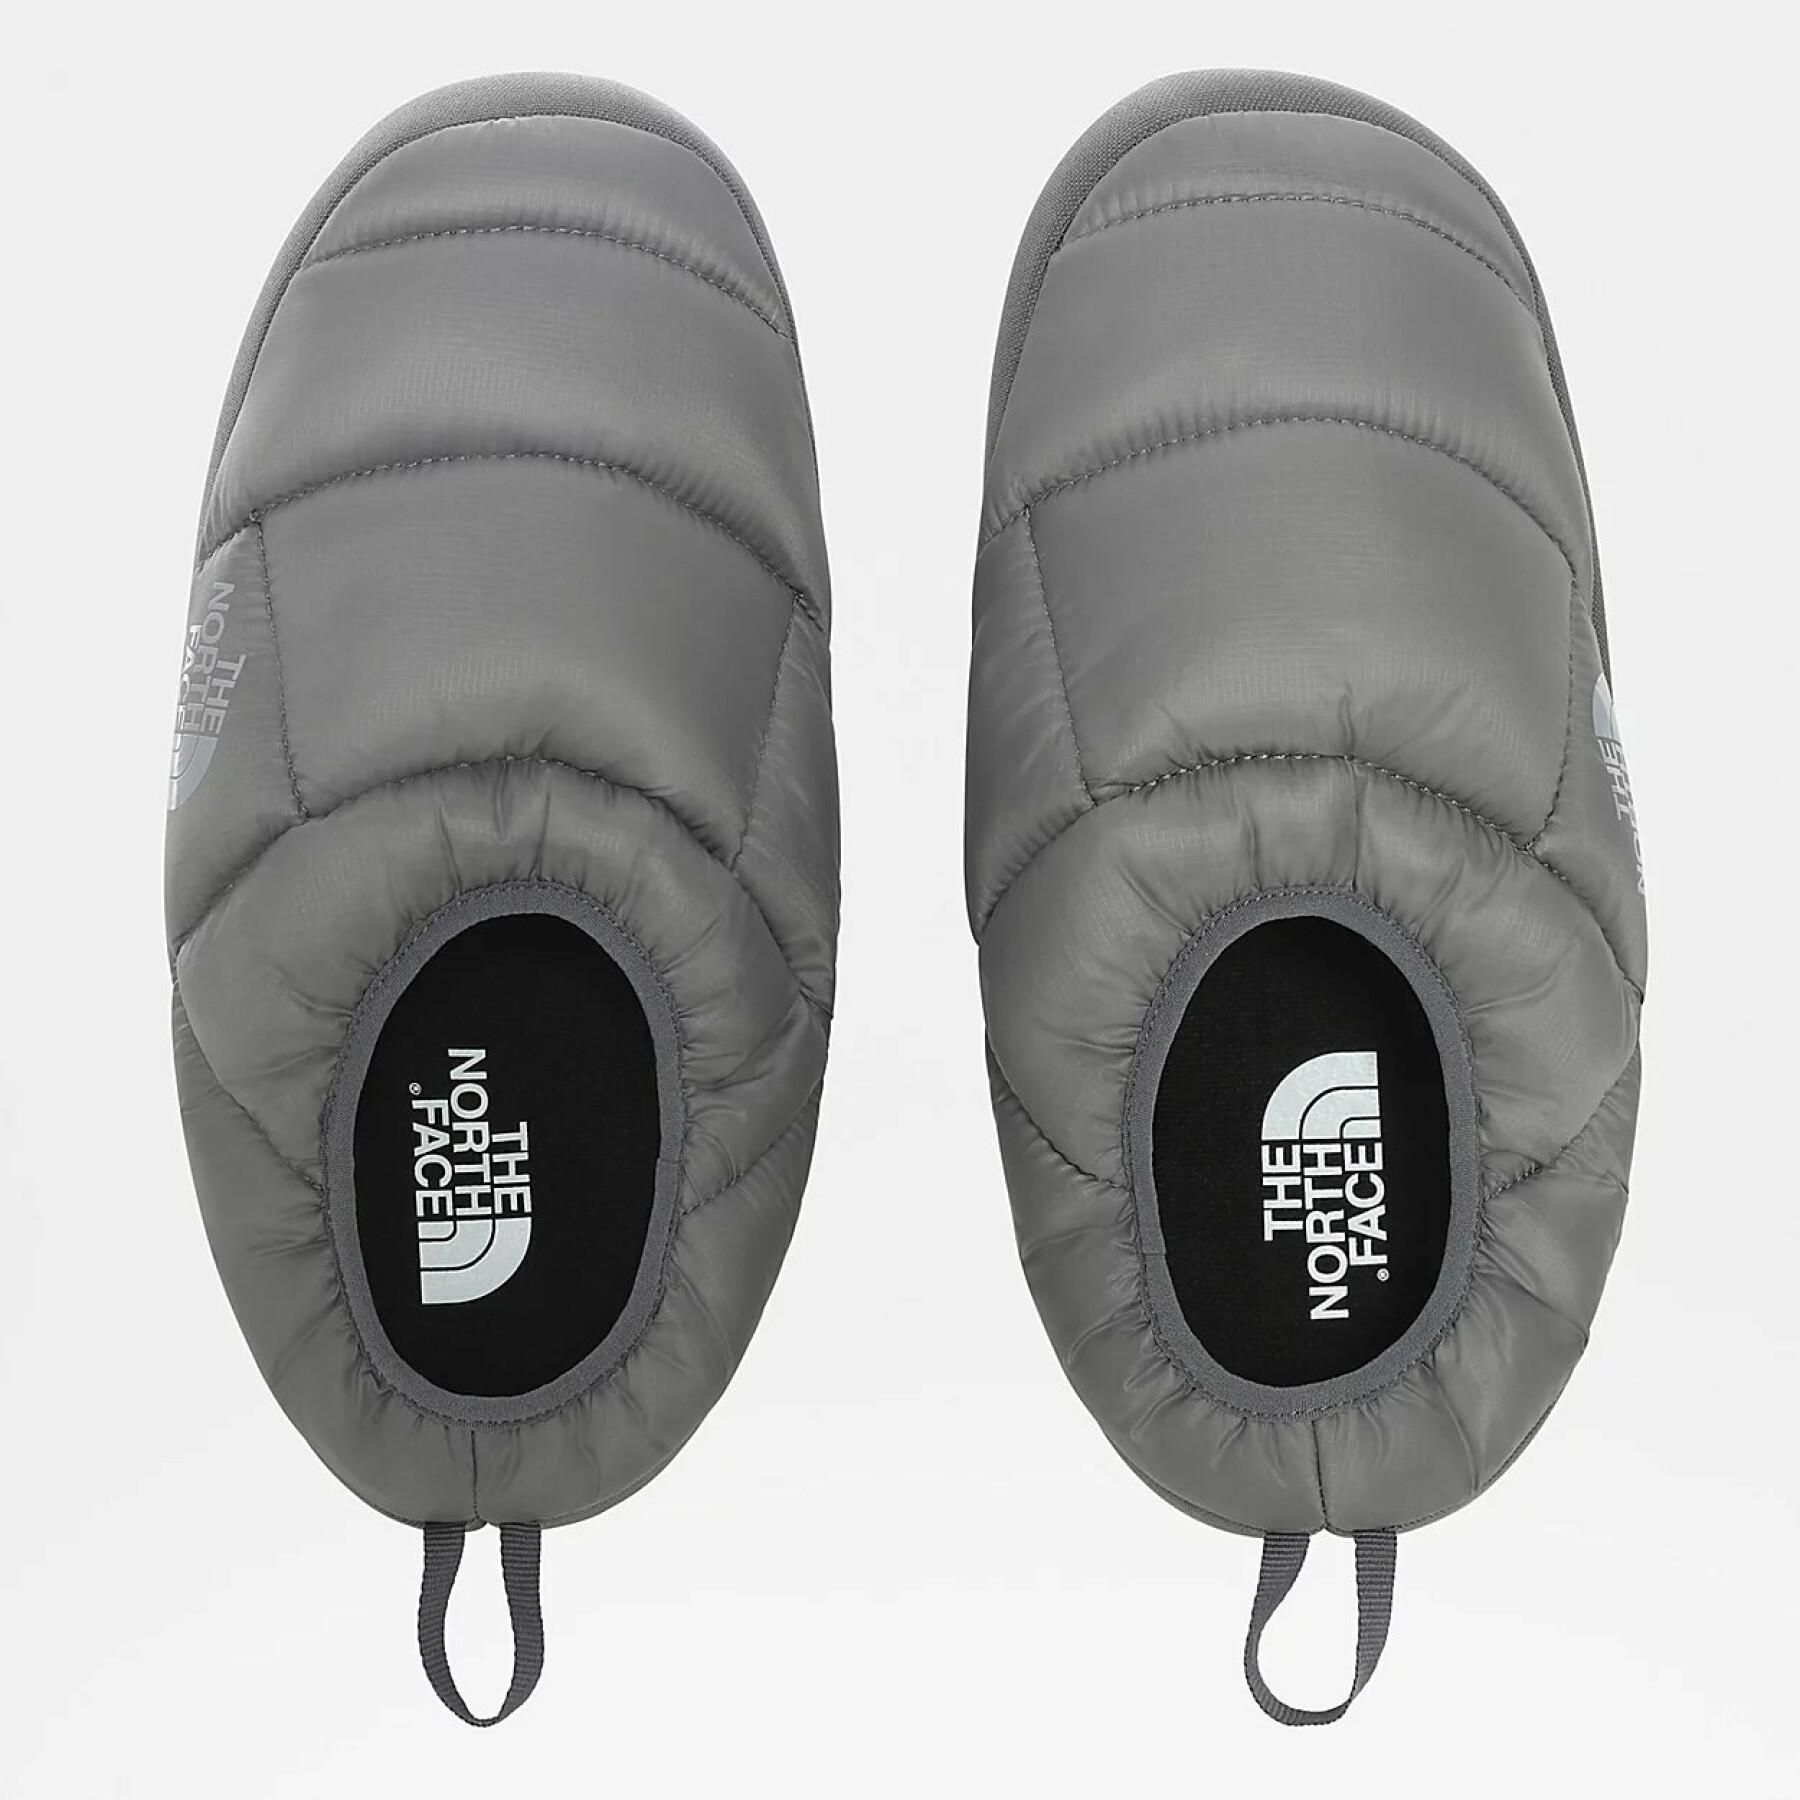 Zapatillas The North face Nse Tent Mule III